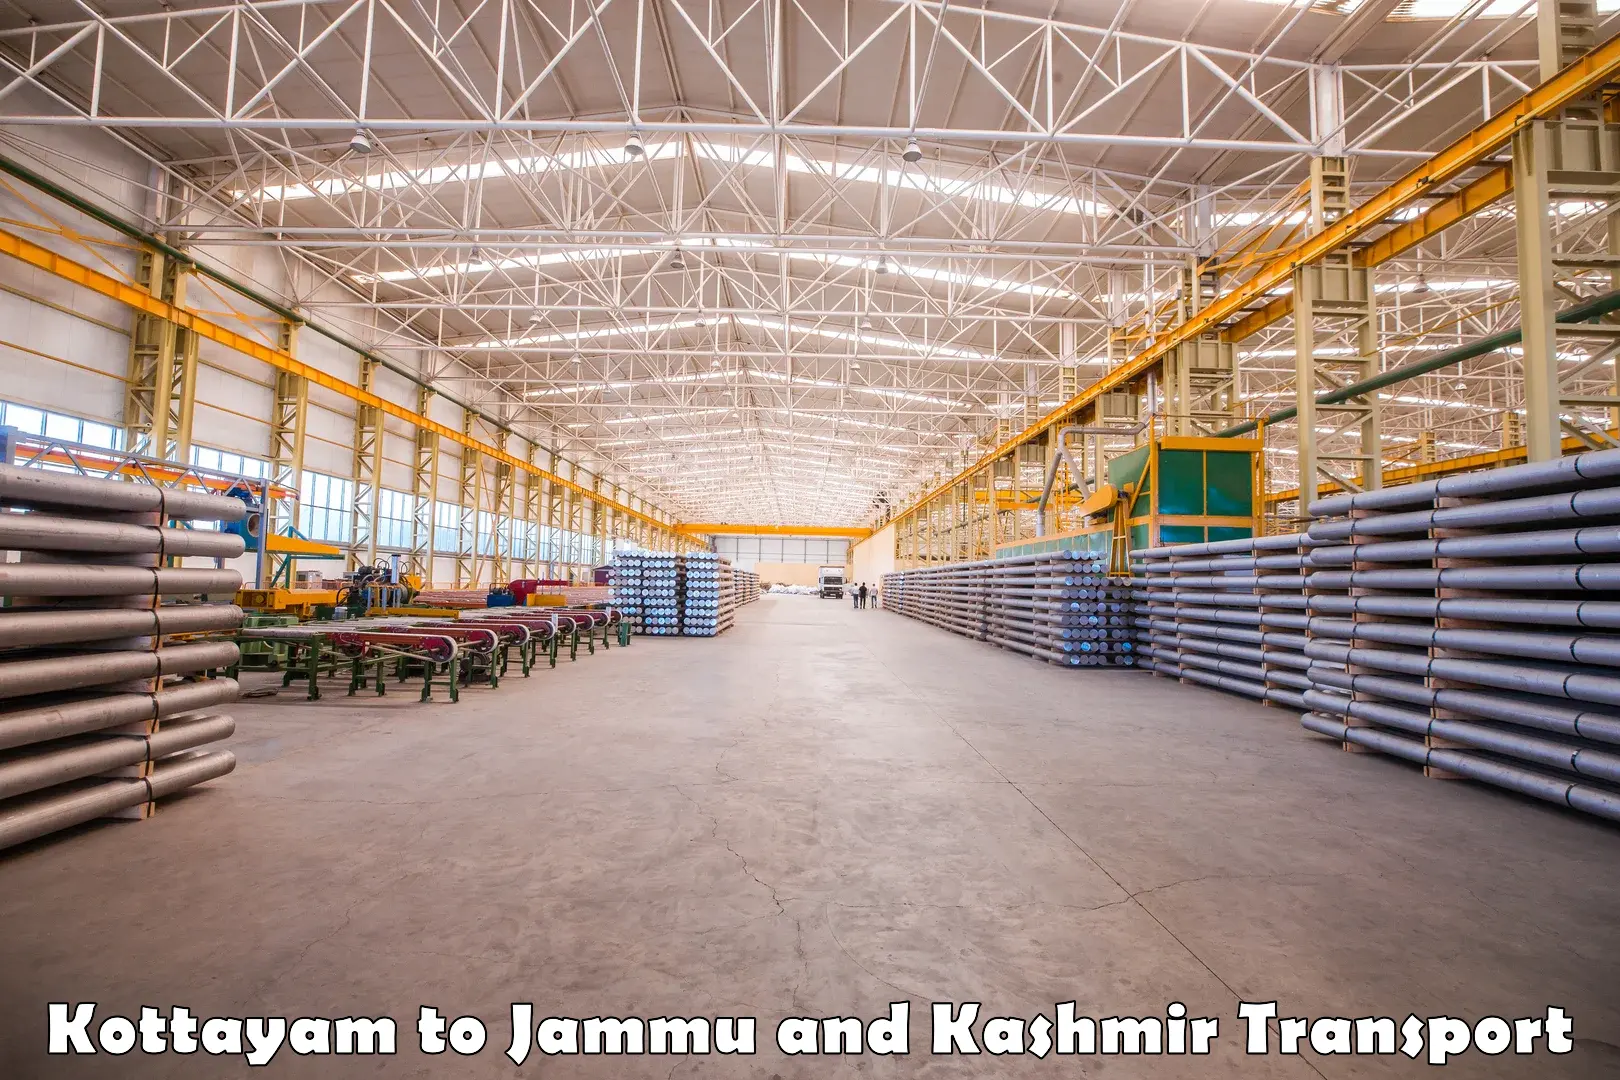 Transport bike from one state to another Kottayam to Jammu and Kashmir